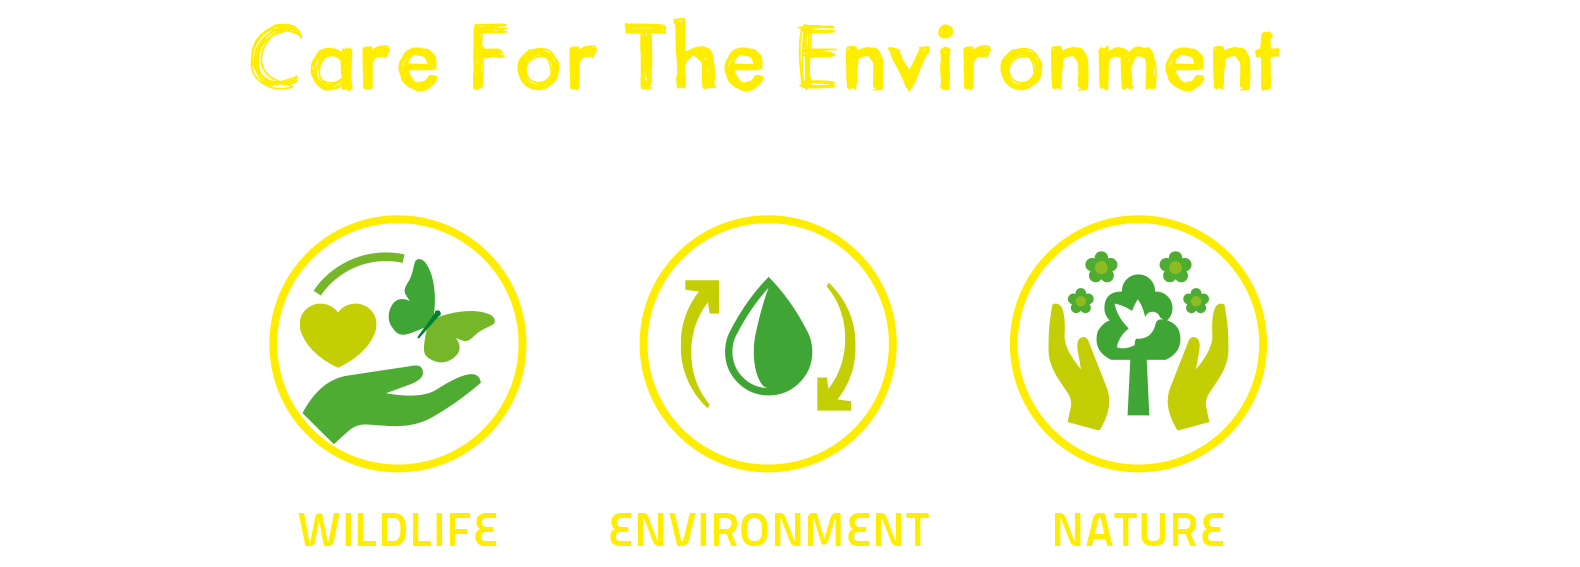 Care For The Environment